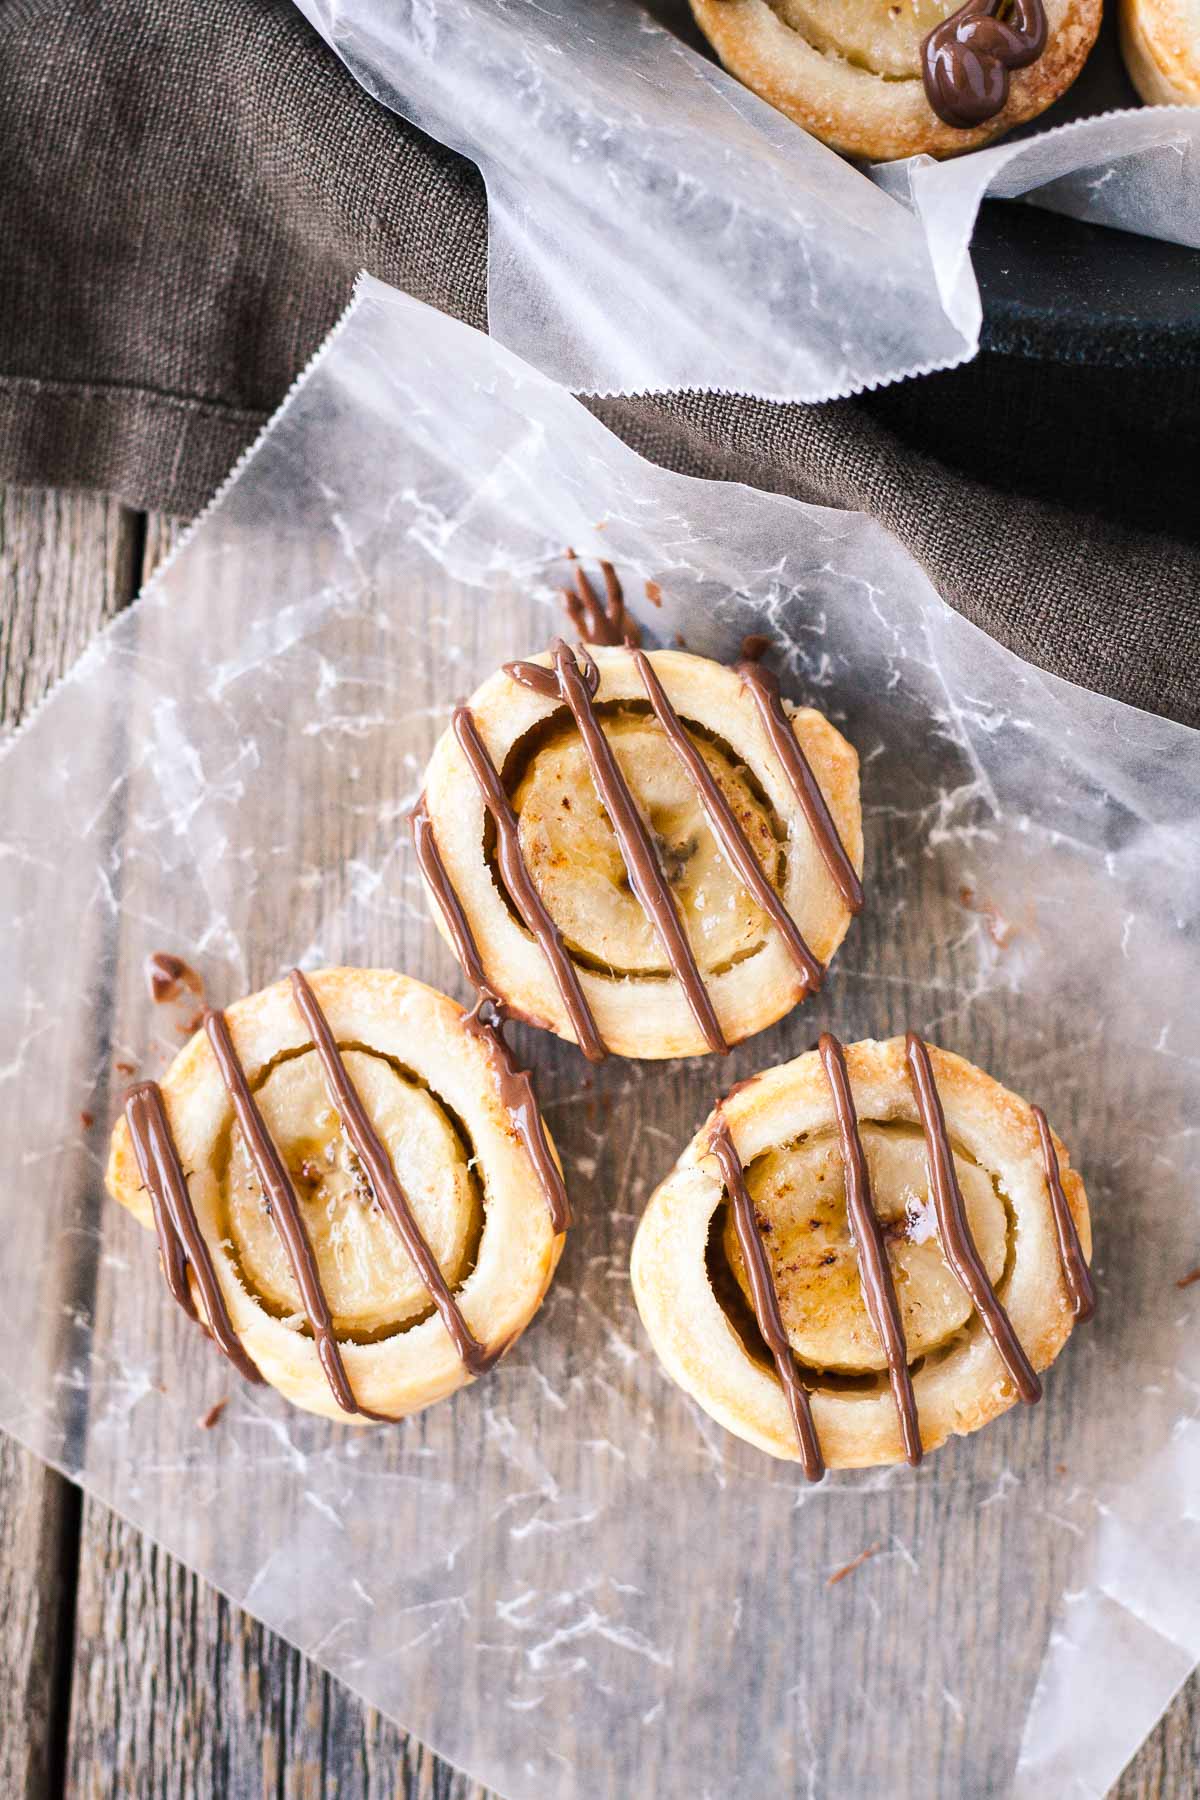 Banana bites drizzled with chocolate on a piece of parchment.